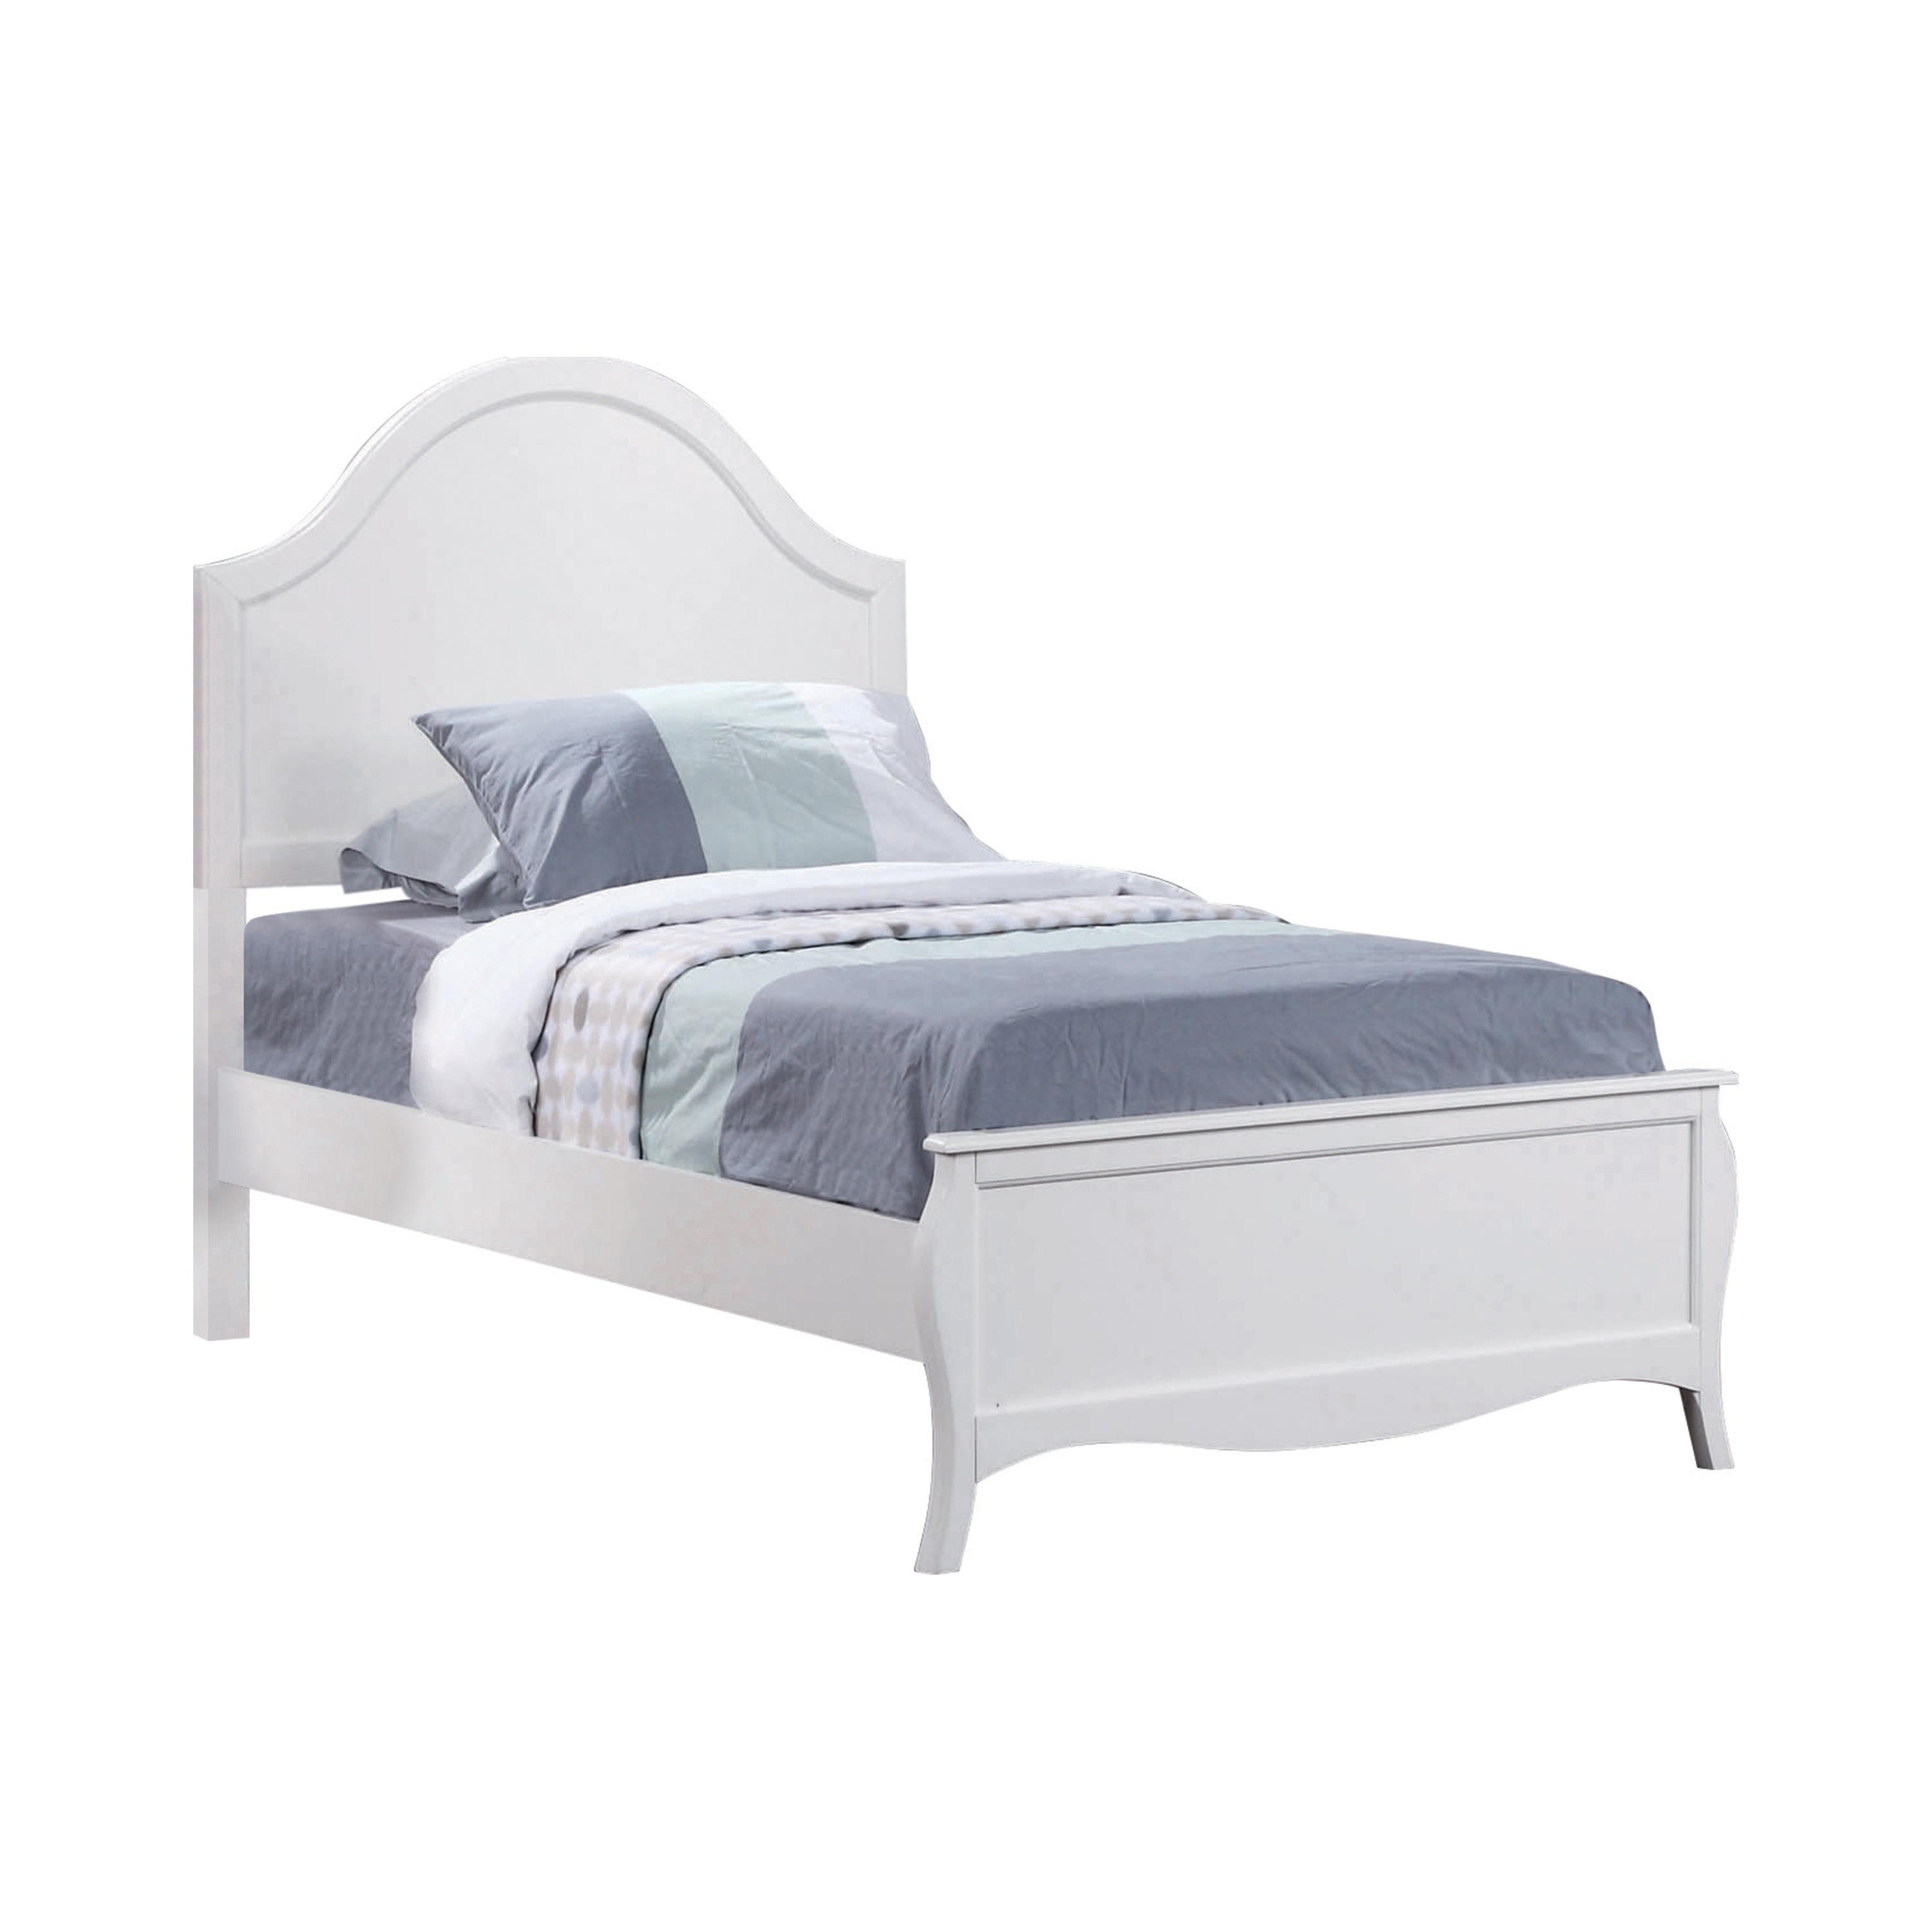 

    
French Country White Wood Twin Bedroom Set 3pcs Coaster 400561T Dominique
